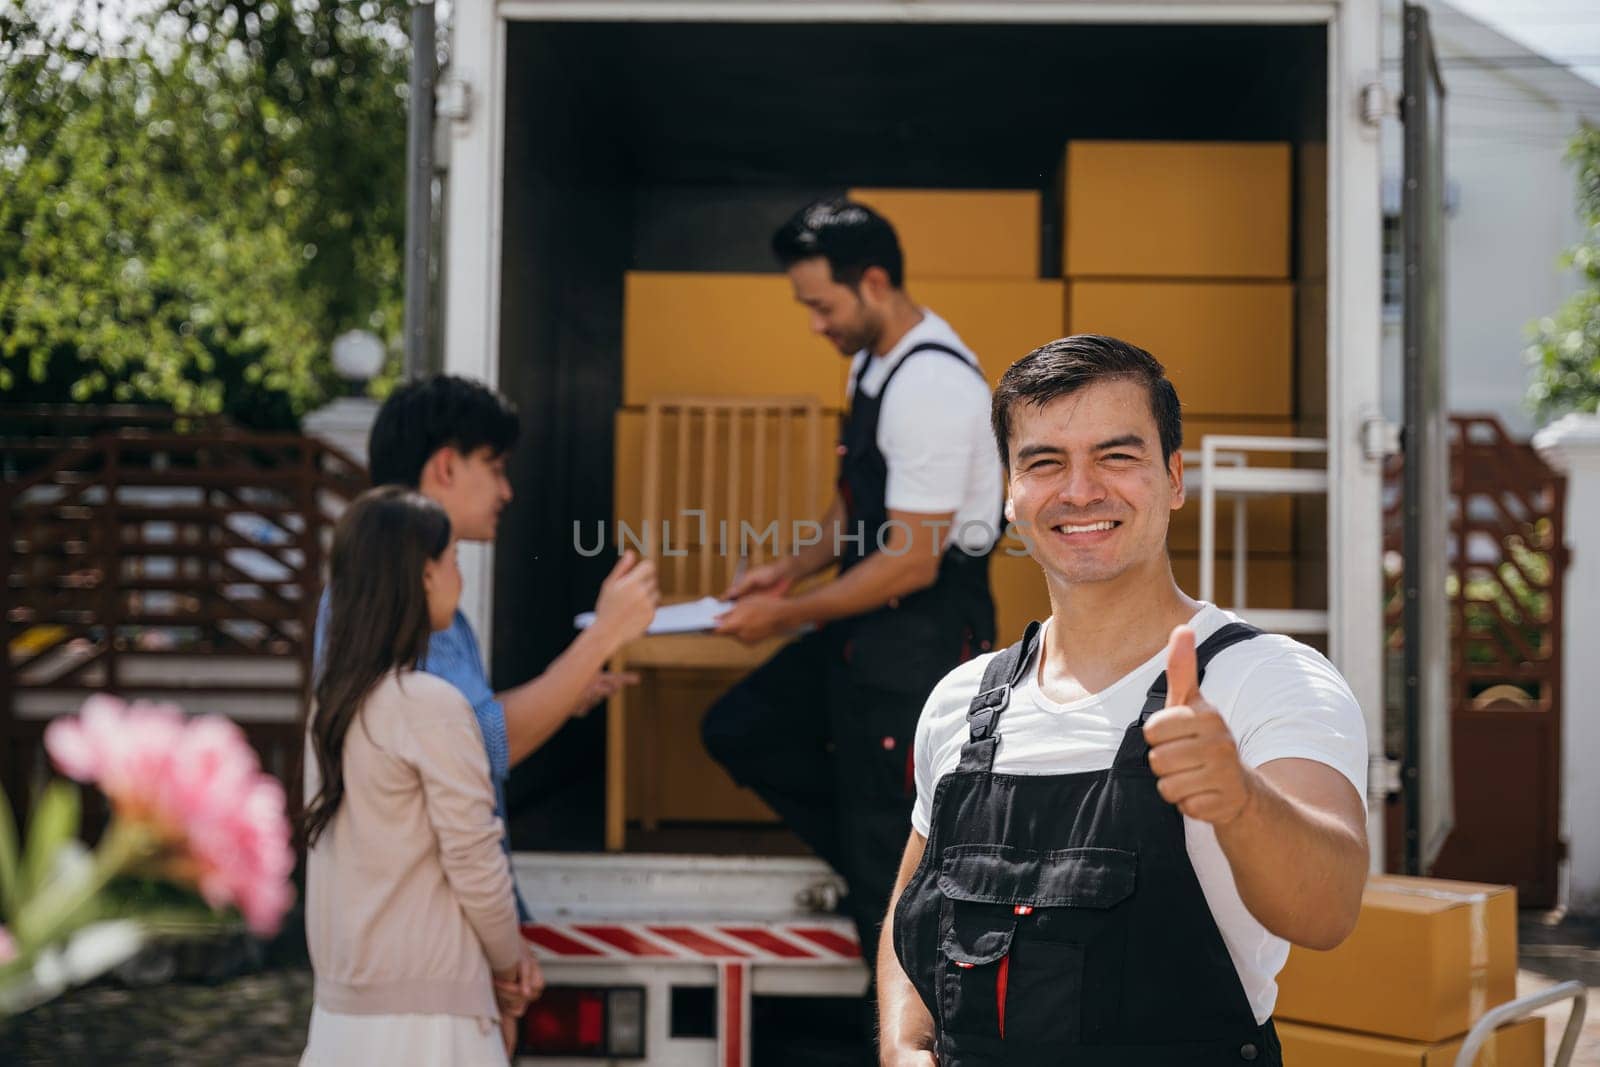 Portrait of a happy mover working unloading boxes into a new home from a truck. These removal company workers ensure smooth relocation spreading joy. Moving day concept by Sorapop